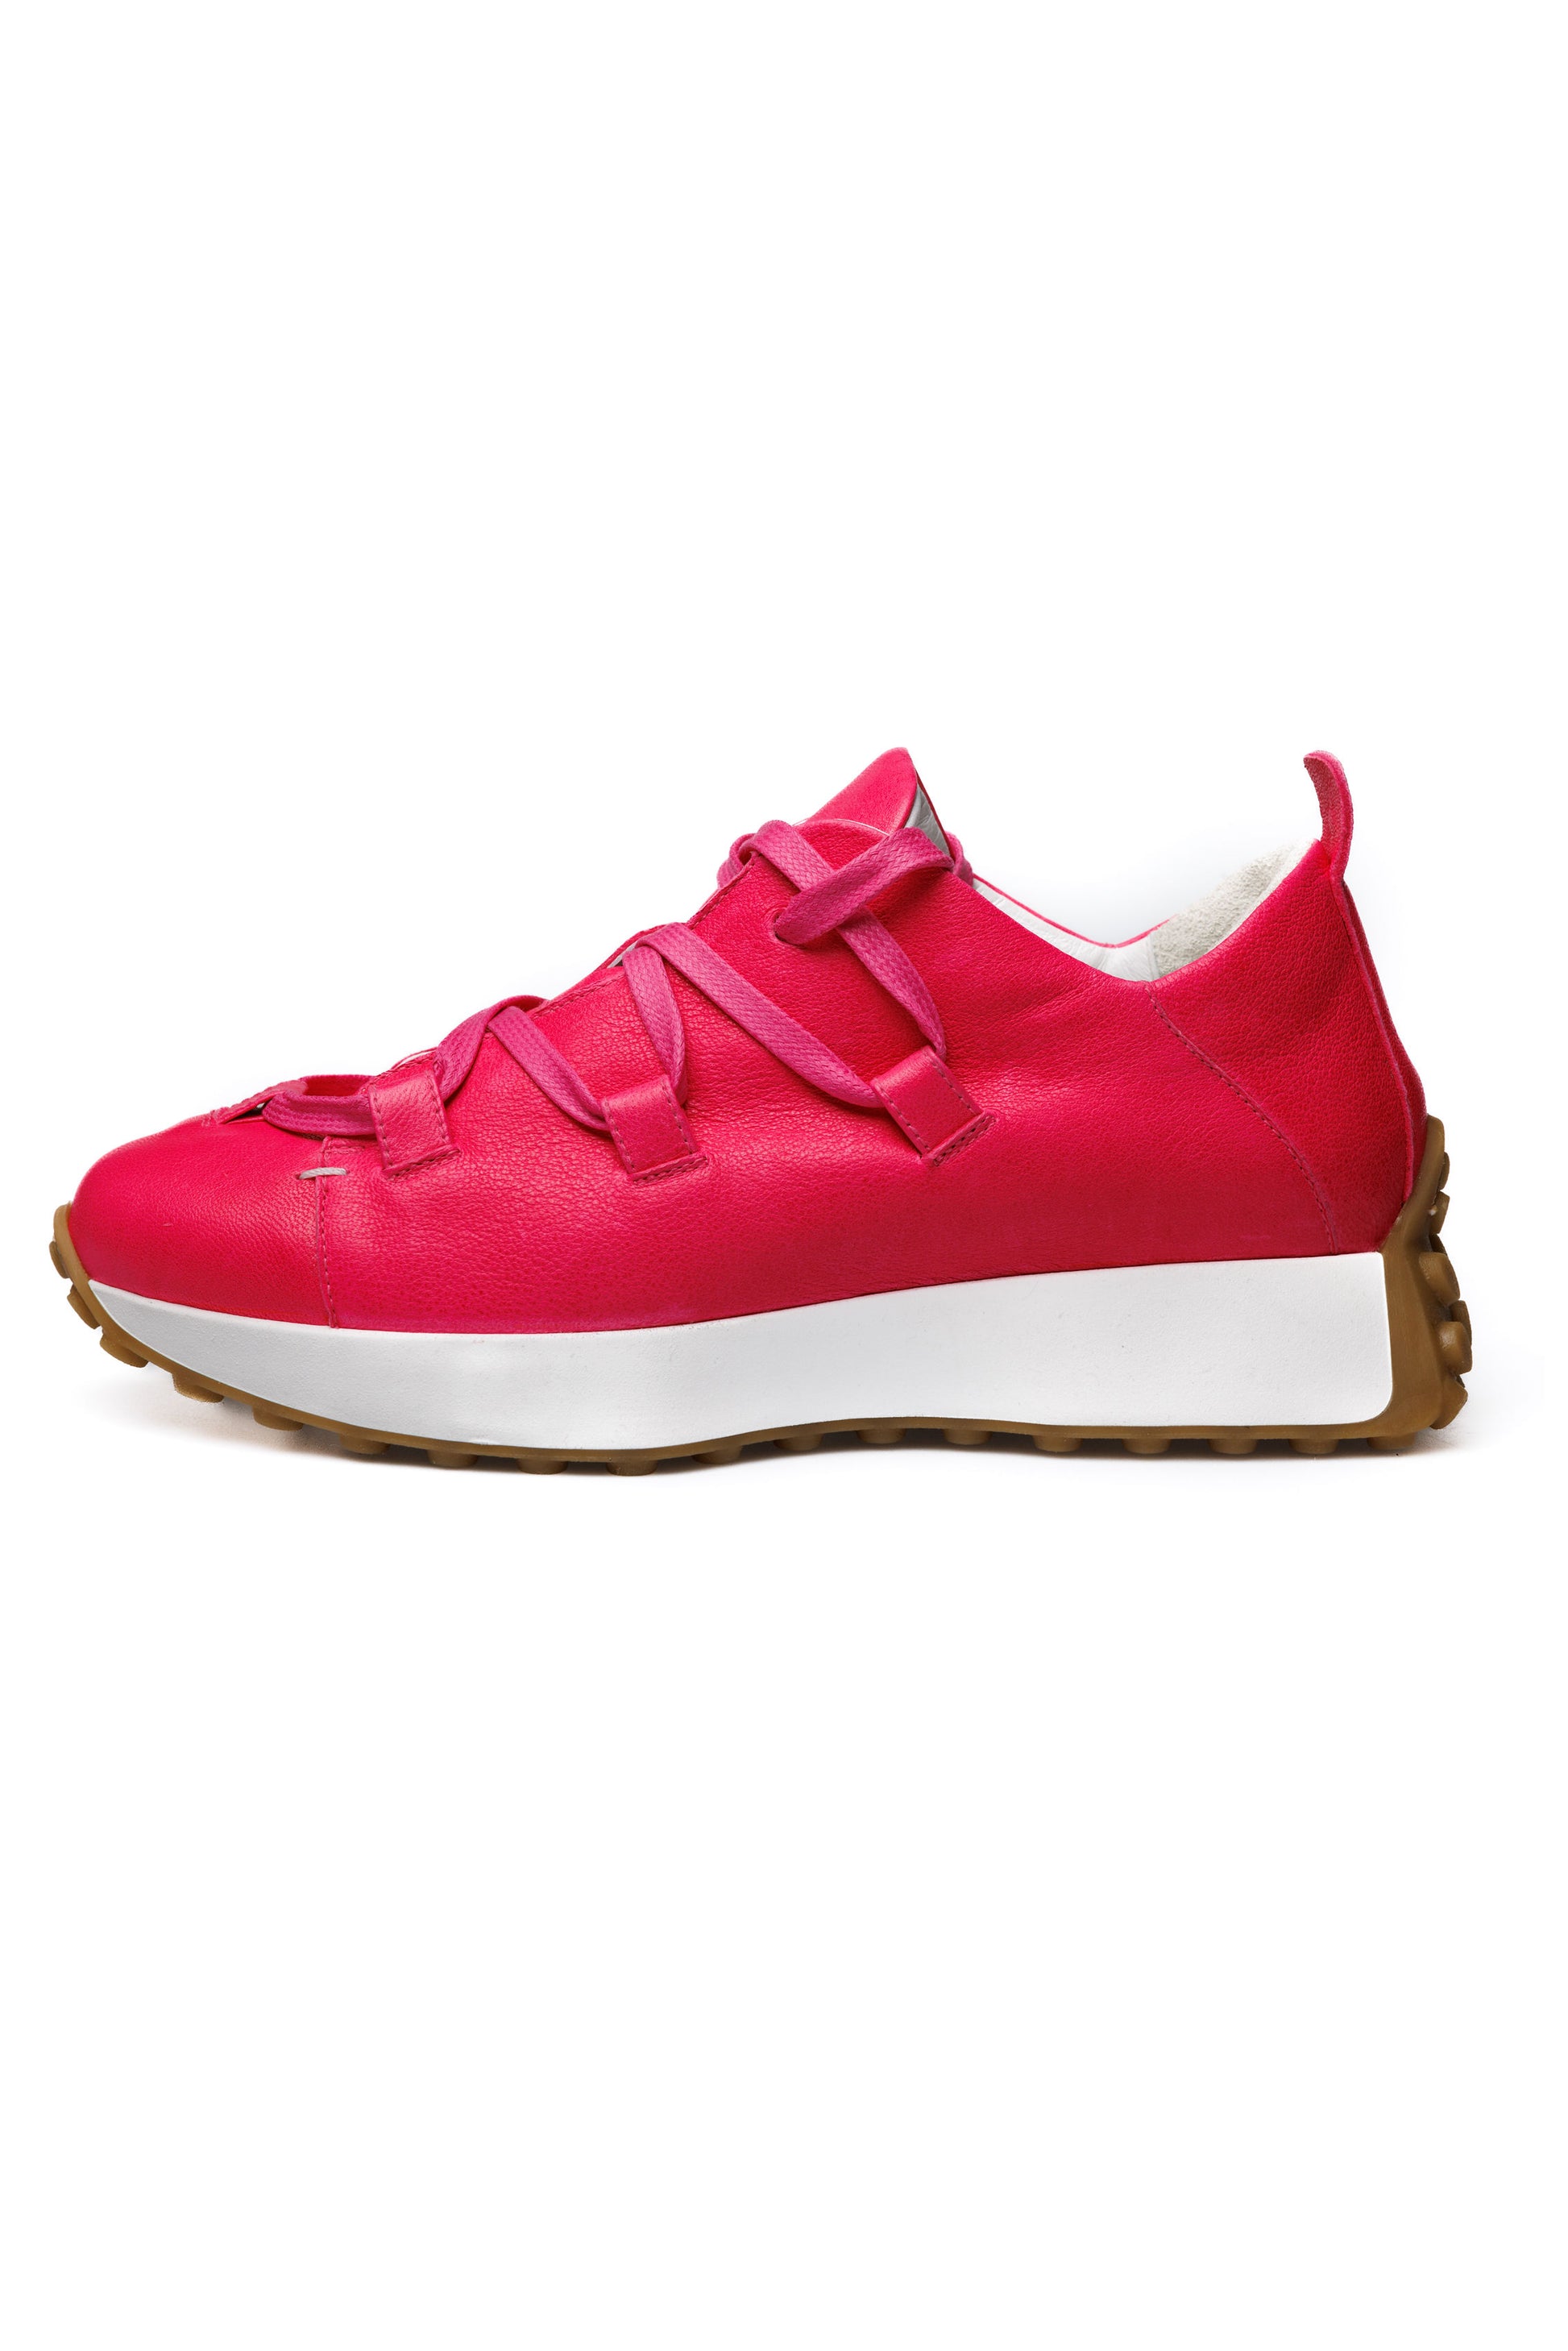 HENRY BEGUELIN Old Iron Leather Sneaker in Fuxia